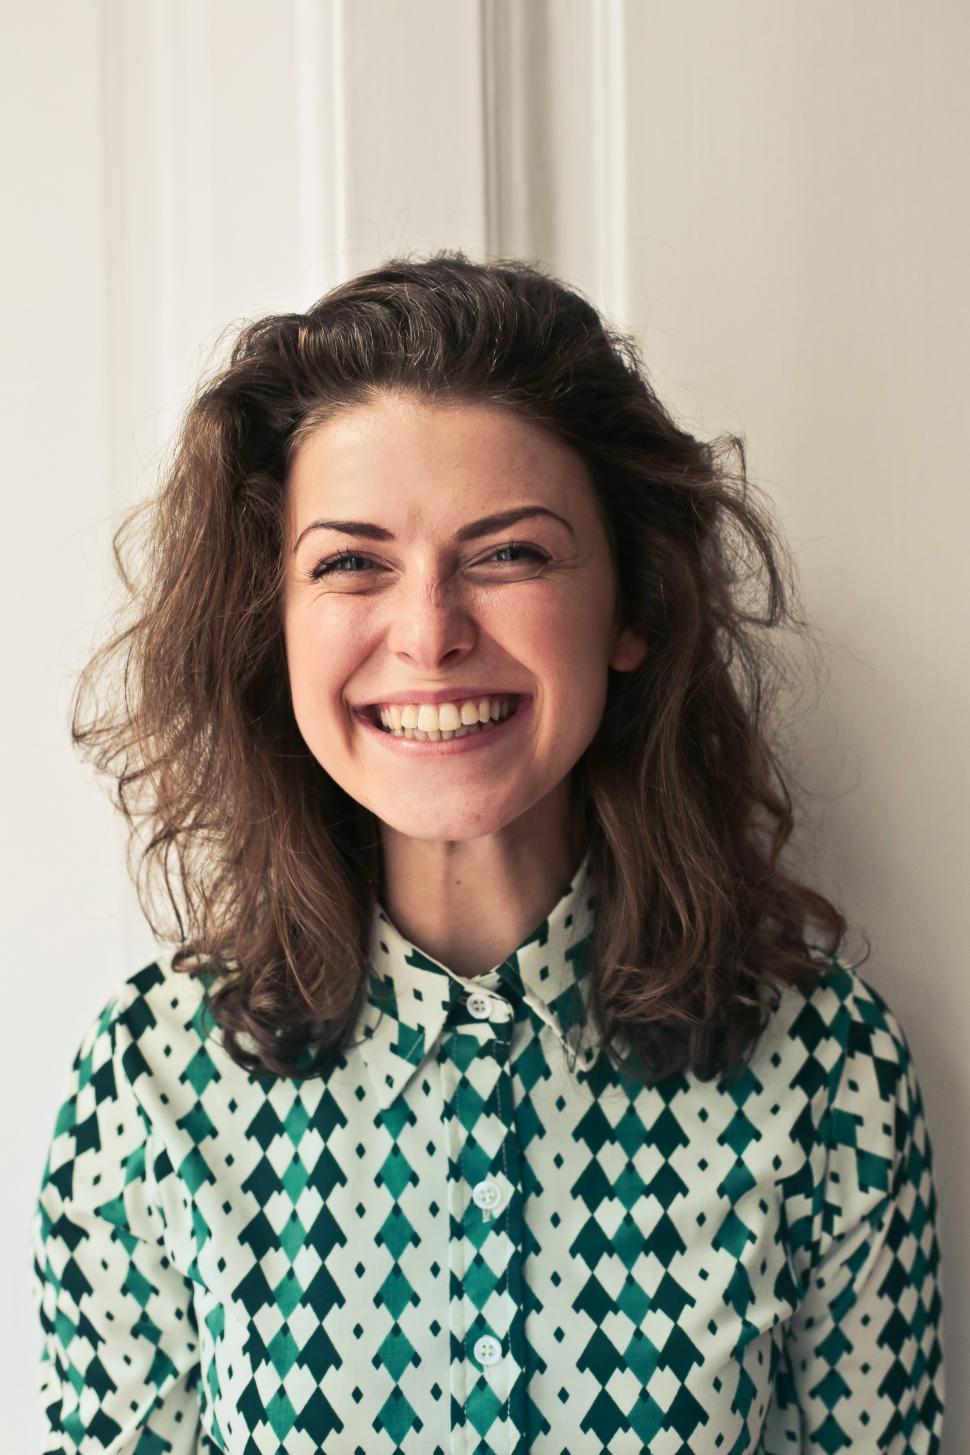 young-woman-in-printed-collared-shirt-seen-smiling-as-looking-at